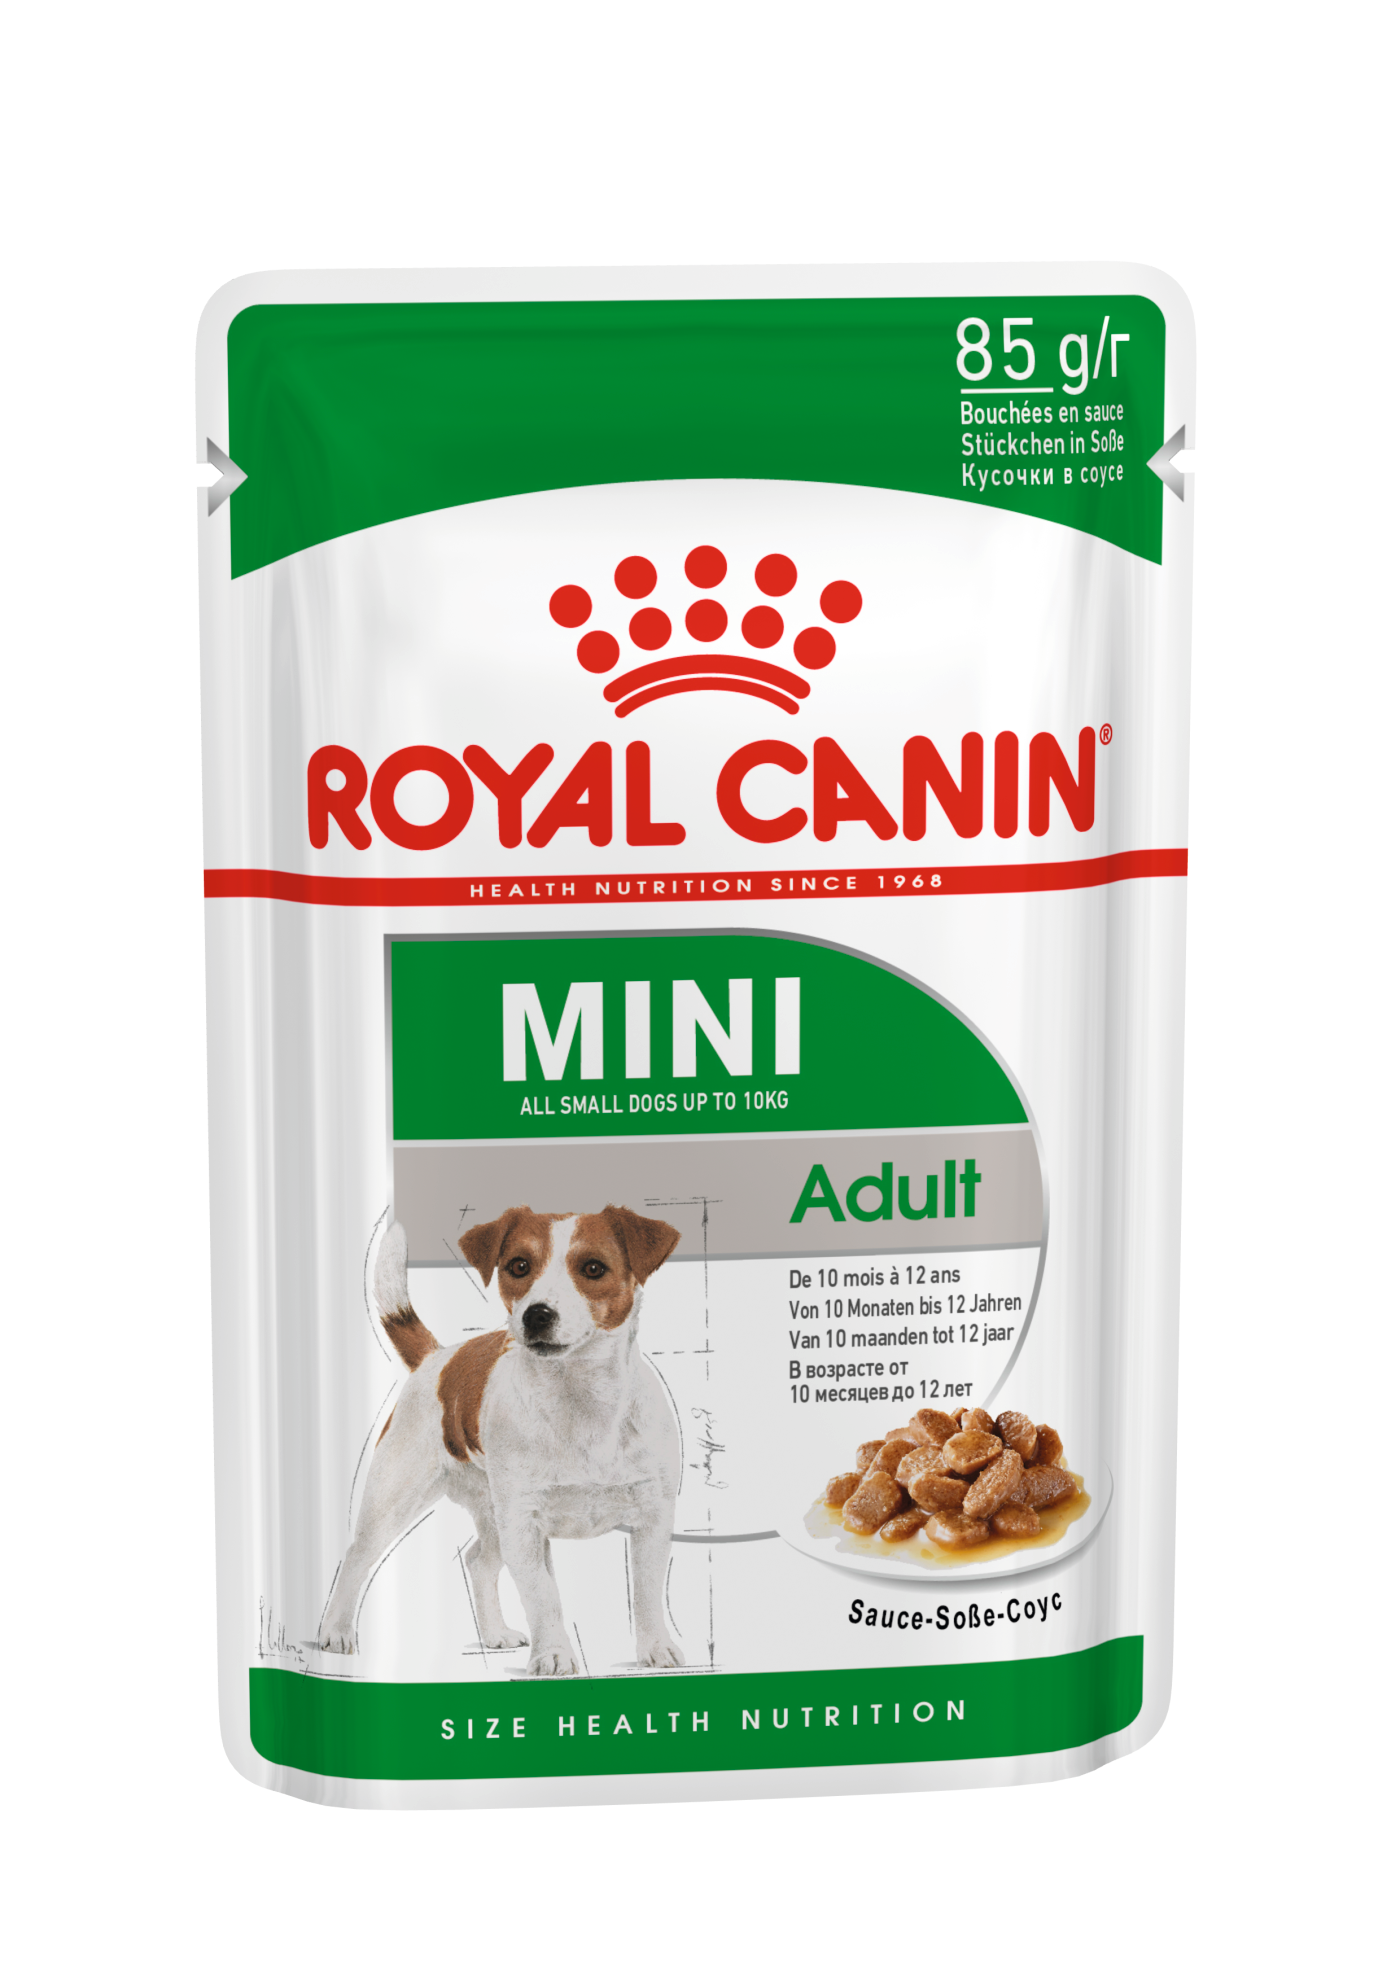 dog food royal canin price of 10kg